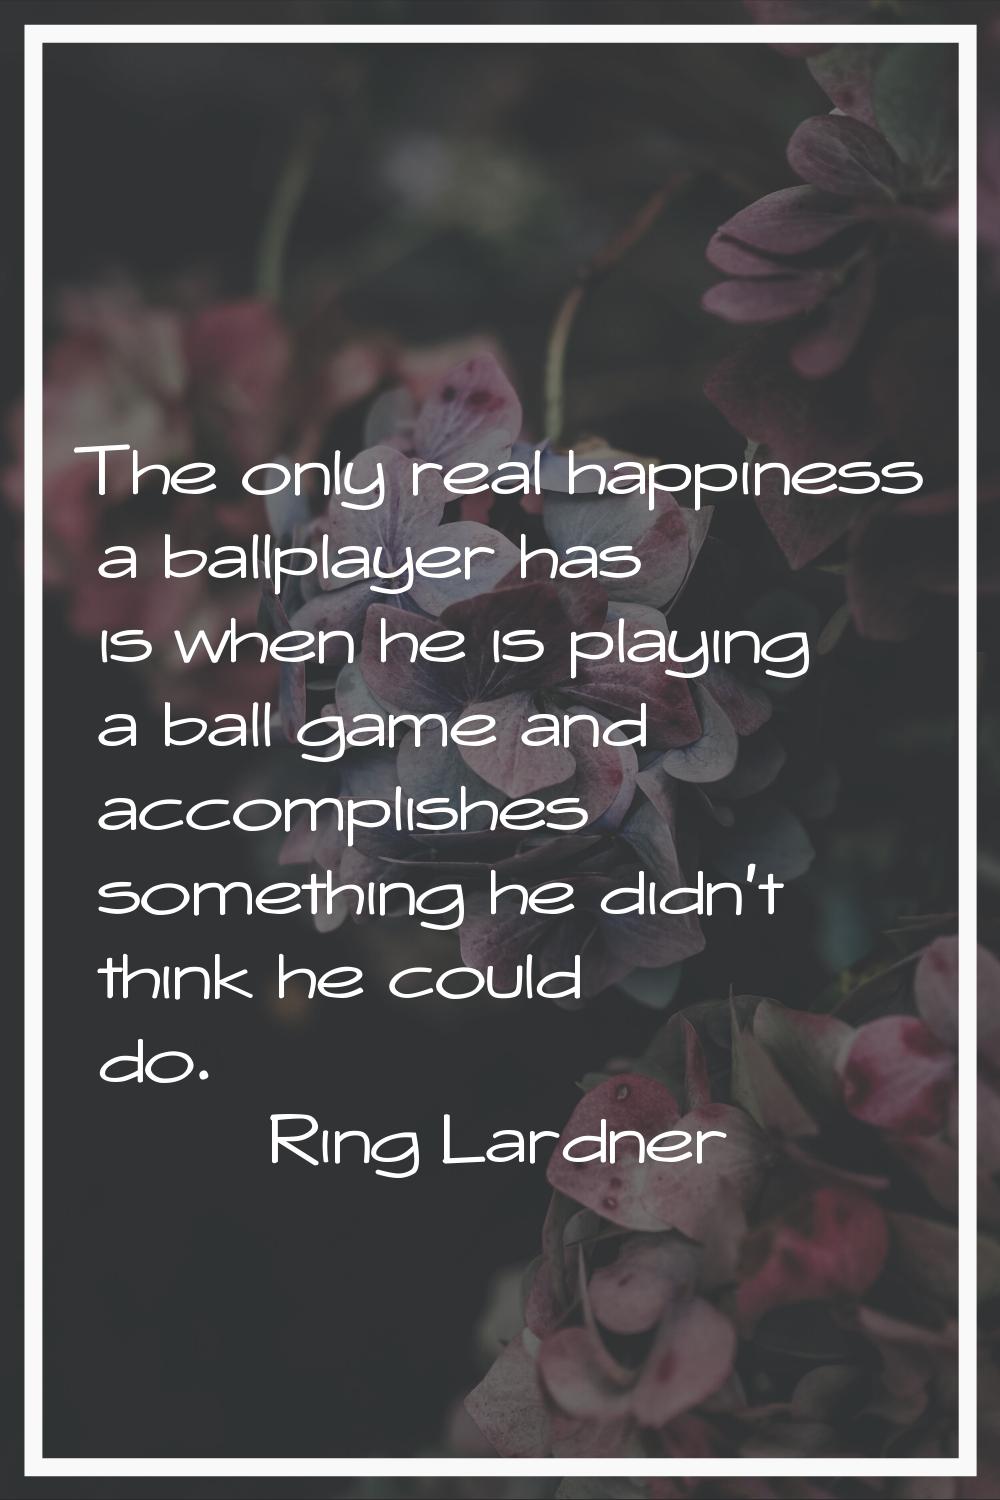 The only real happiness a ballplayer has is when he is playing a ball game and accomplishes somethi